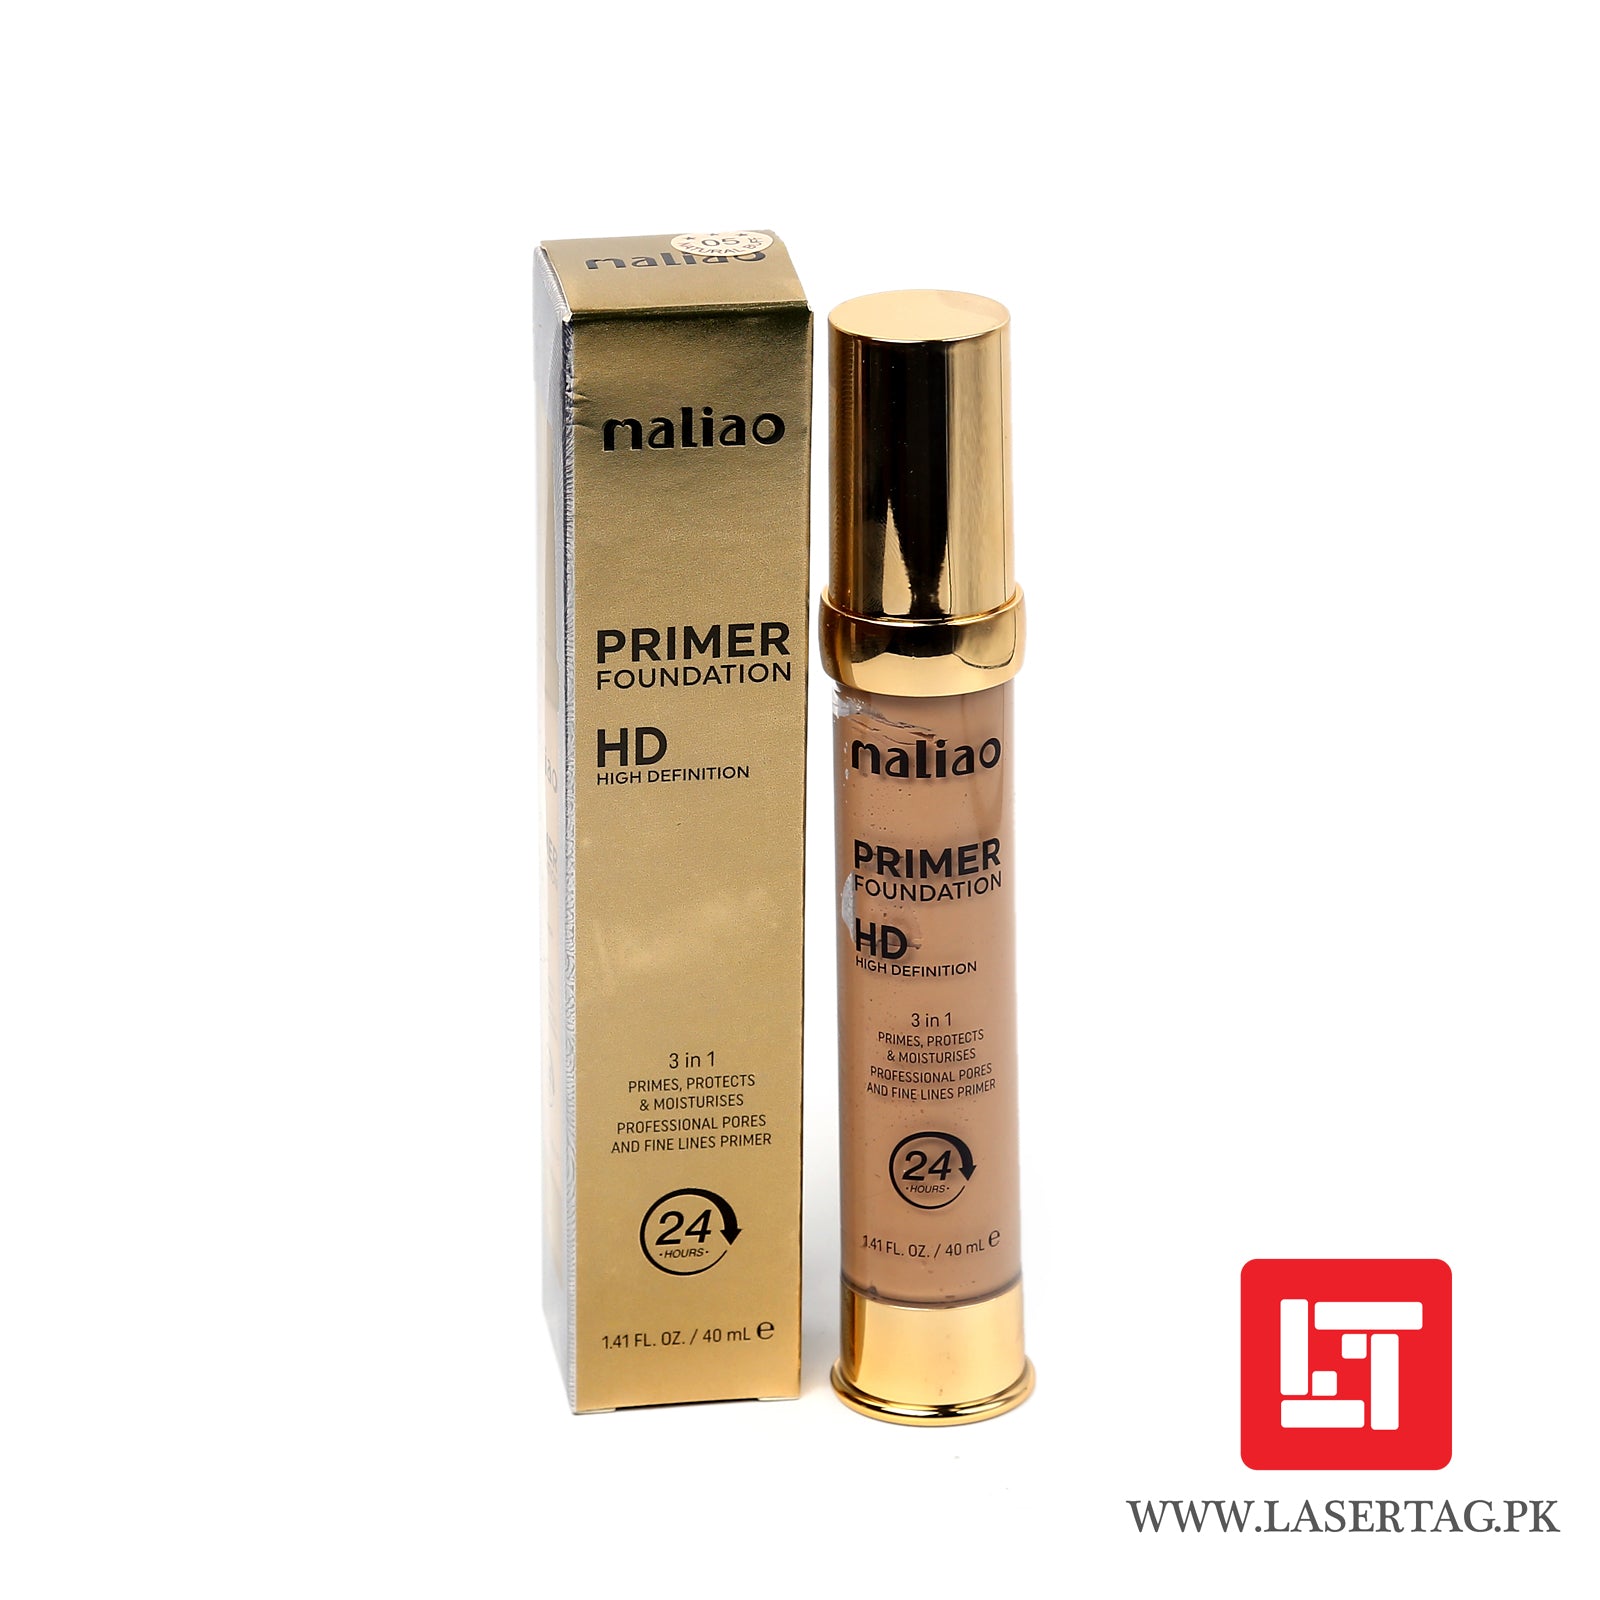 Maliao Primer Foundation HD High Definition 3 In 1 PRimes, Protects & Moisturises Natural Buff M175-05 40ml freeshipping - lasertag.pk